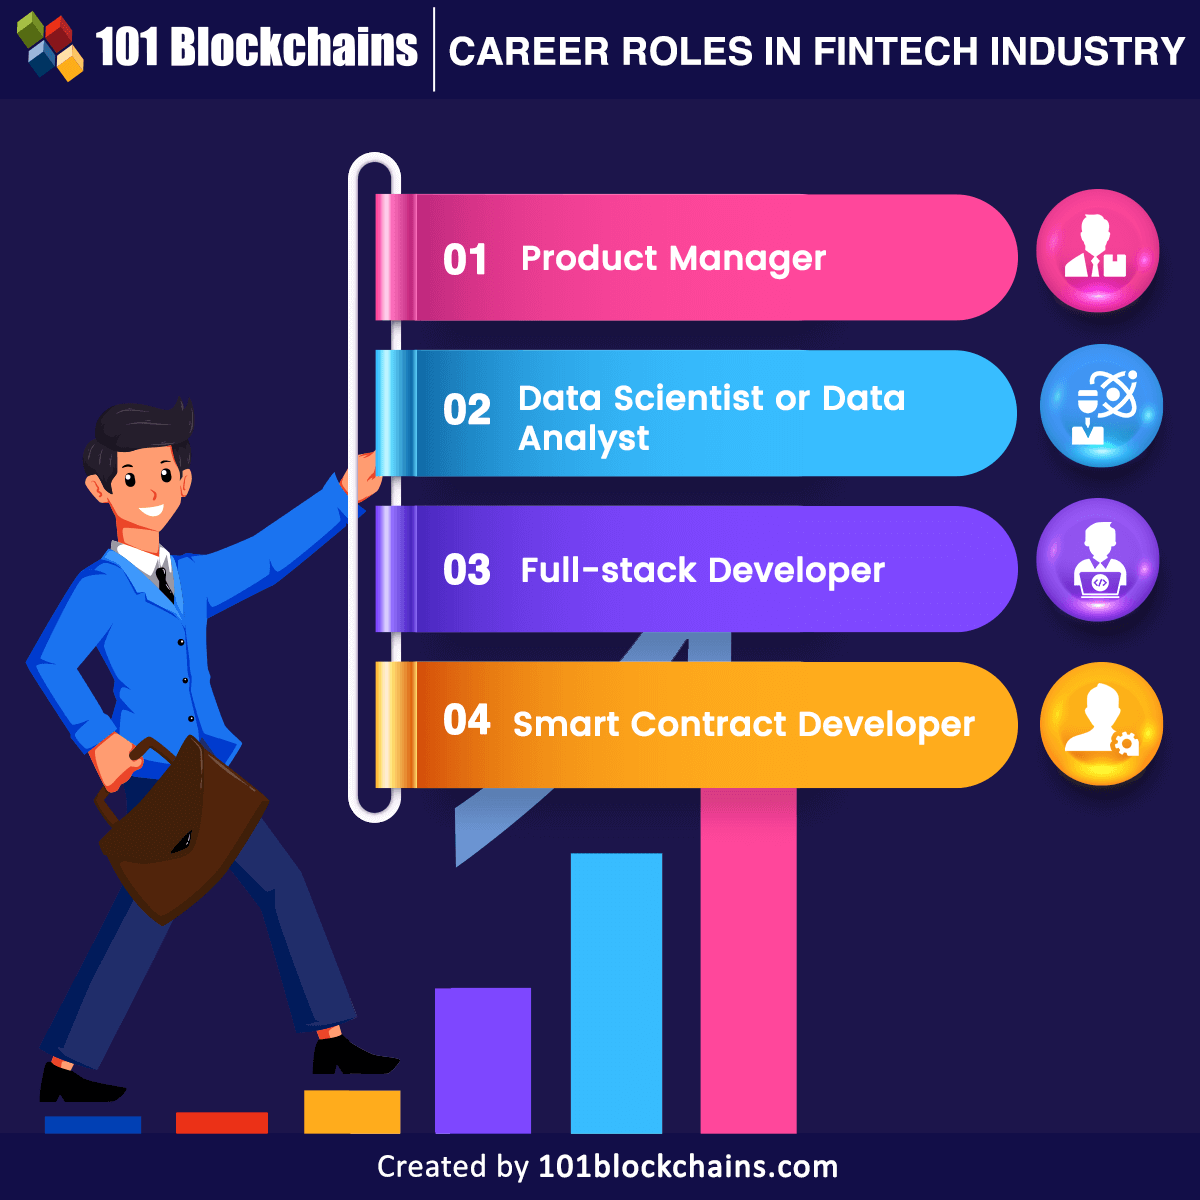 Career Roles in the Fintech Industry